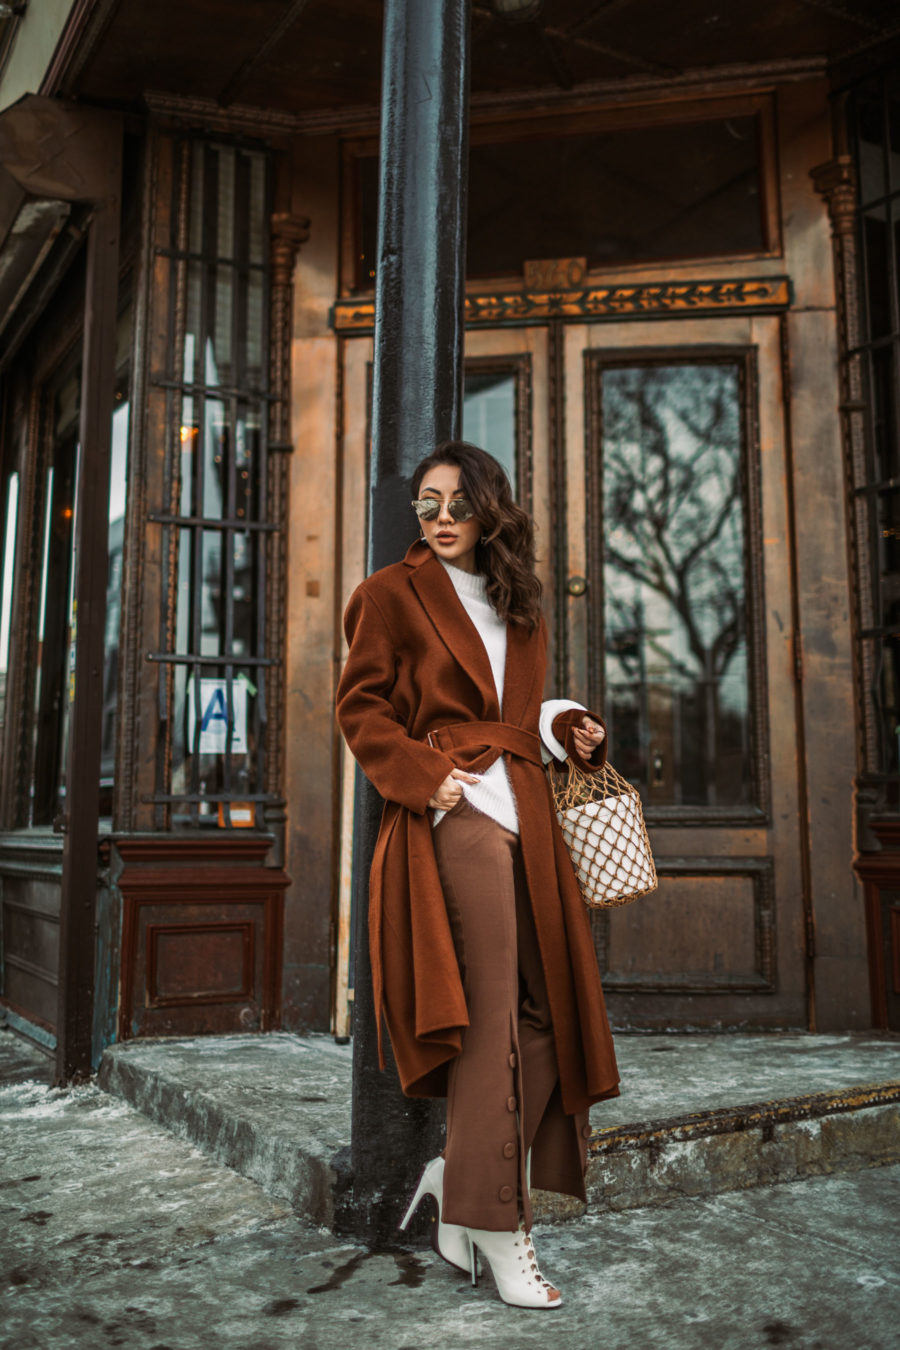 Winter wardrobe essentials - staud macrame bag, brown button trousers, wrap coat, robe coat, chic winter outfit, new york fashion blogger, aviator sunglasses, brown monochromatic outfit // Notjessfashion.com